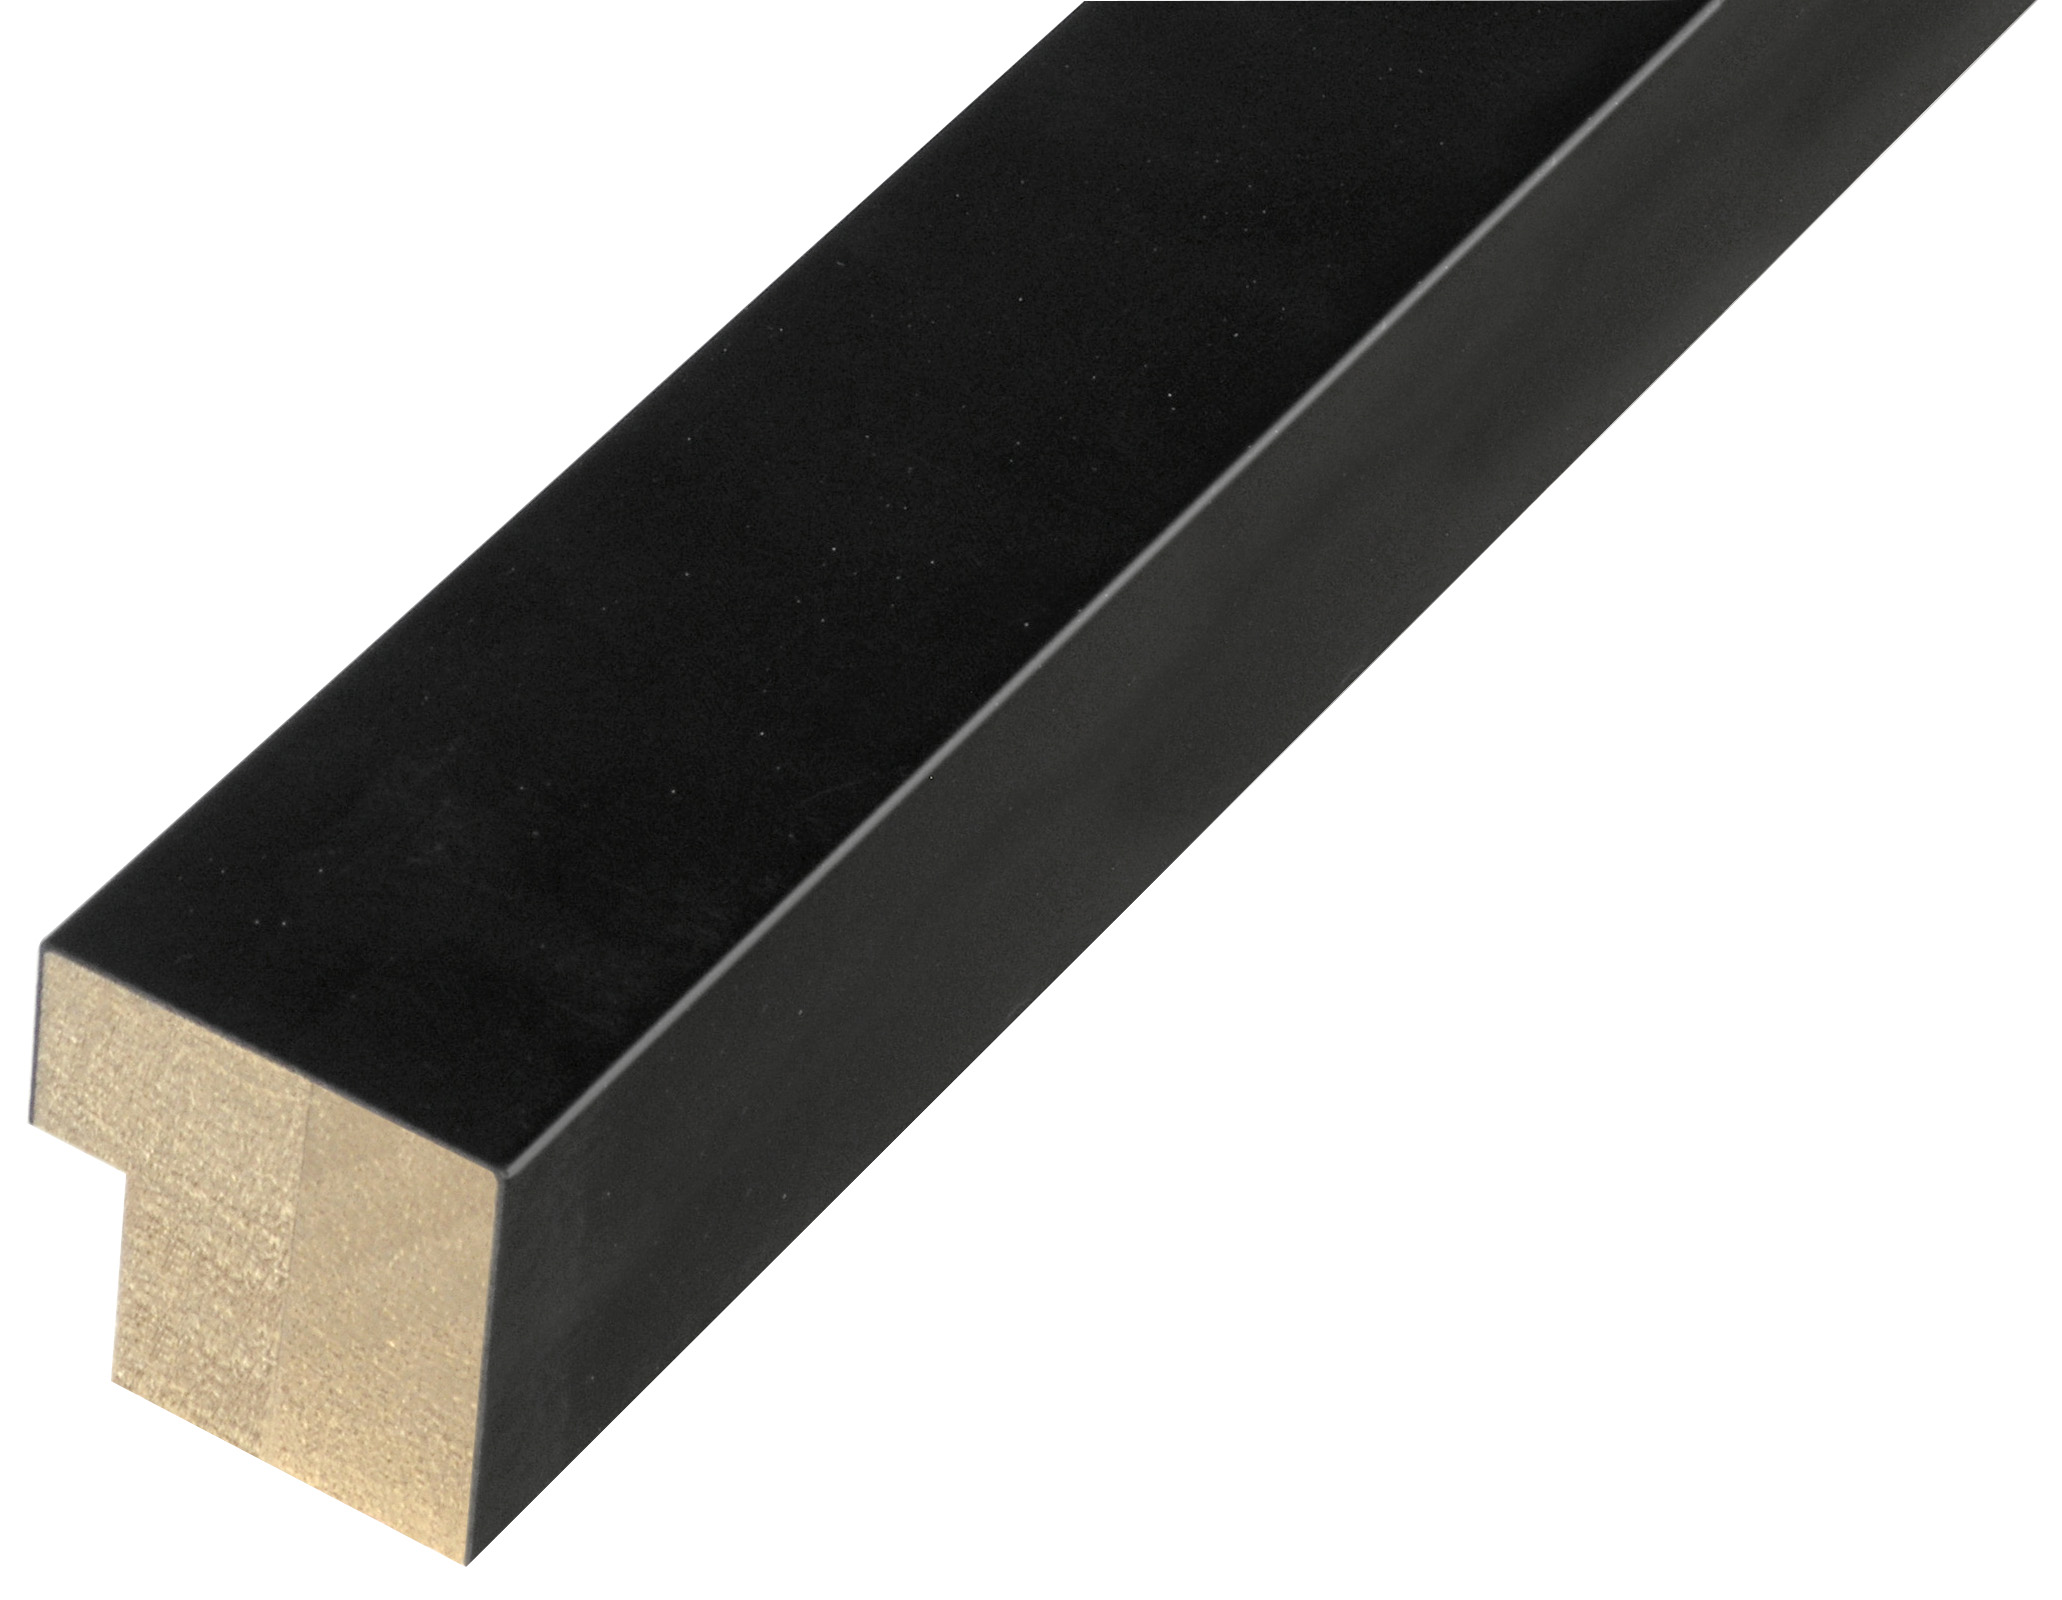 Moulding ayous jointed width 34mm height 34 - matt black